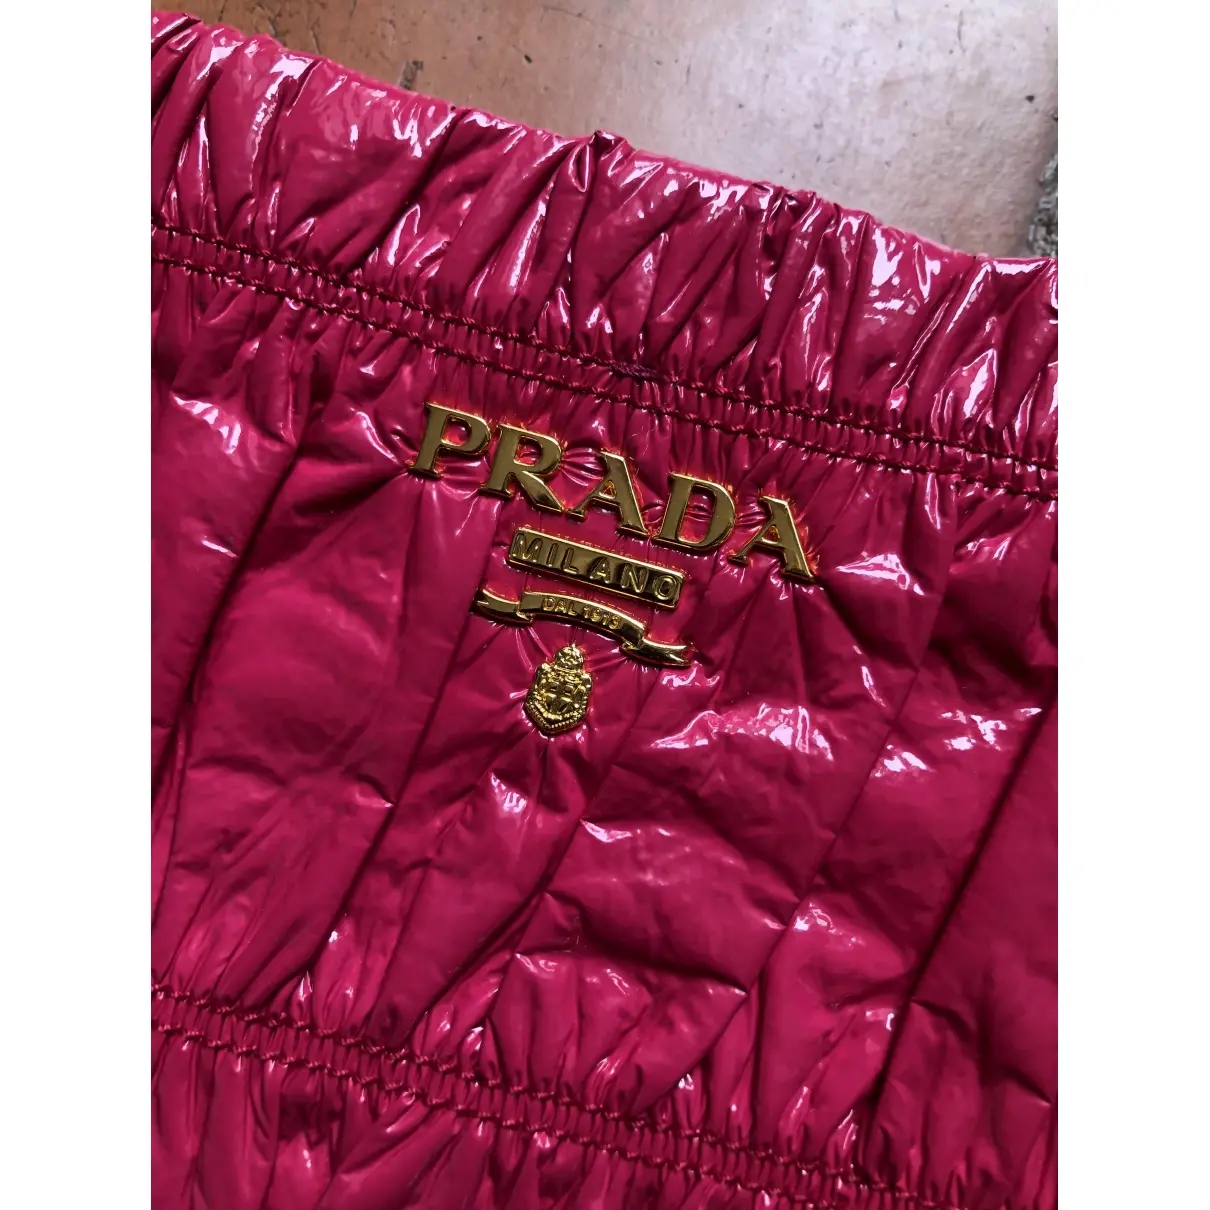 Prada Patent leather clutch bag for sale